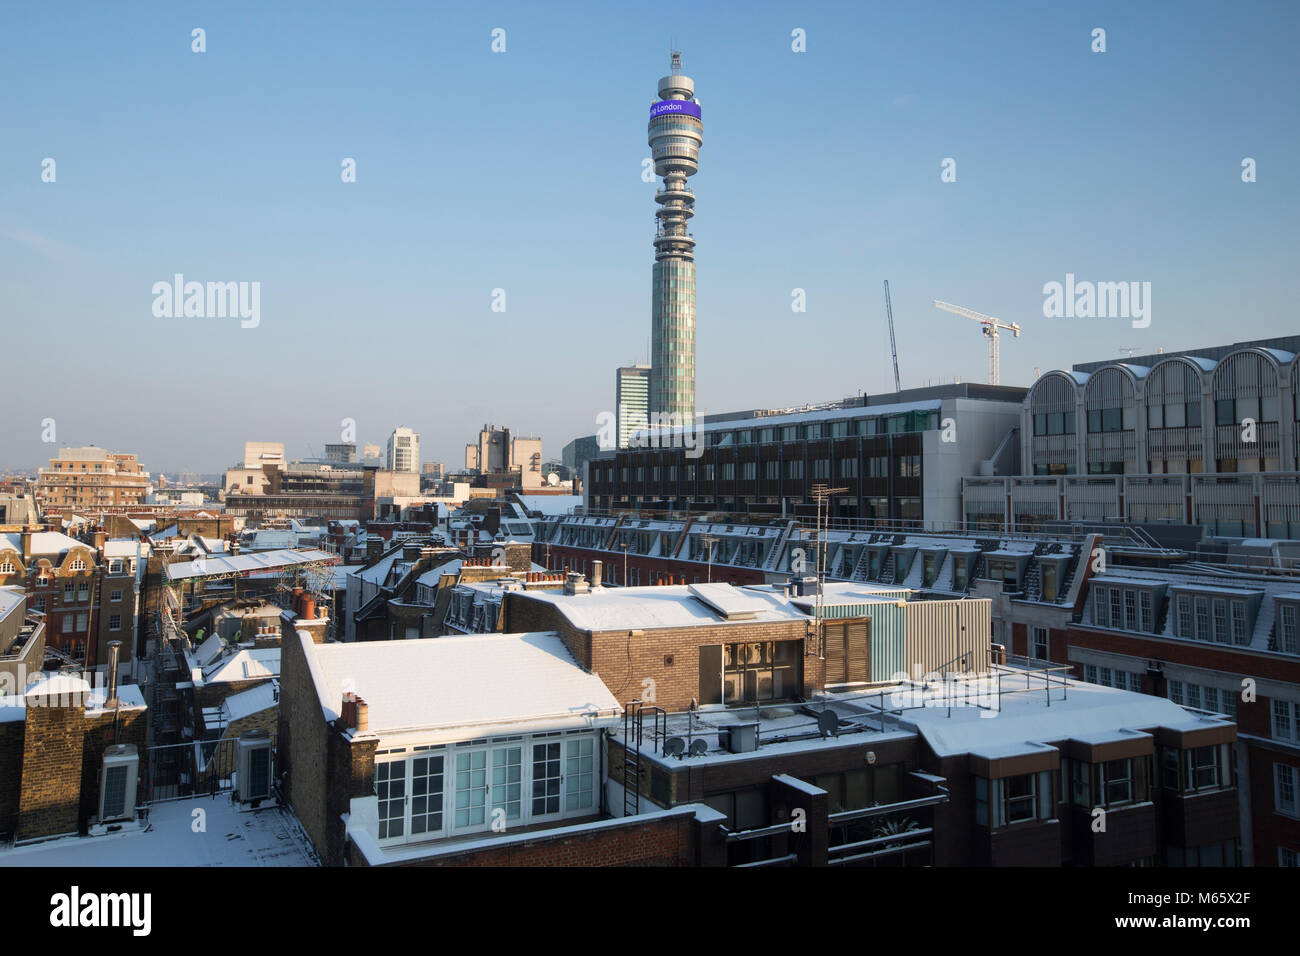 'Beast from the East' artic weather hits West End, London, as BRITAIN is being buffeted by icy Siberian winds and heavy snow showers. Stock Photo